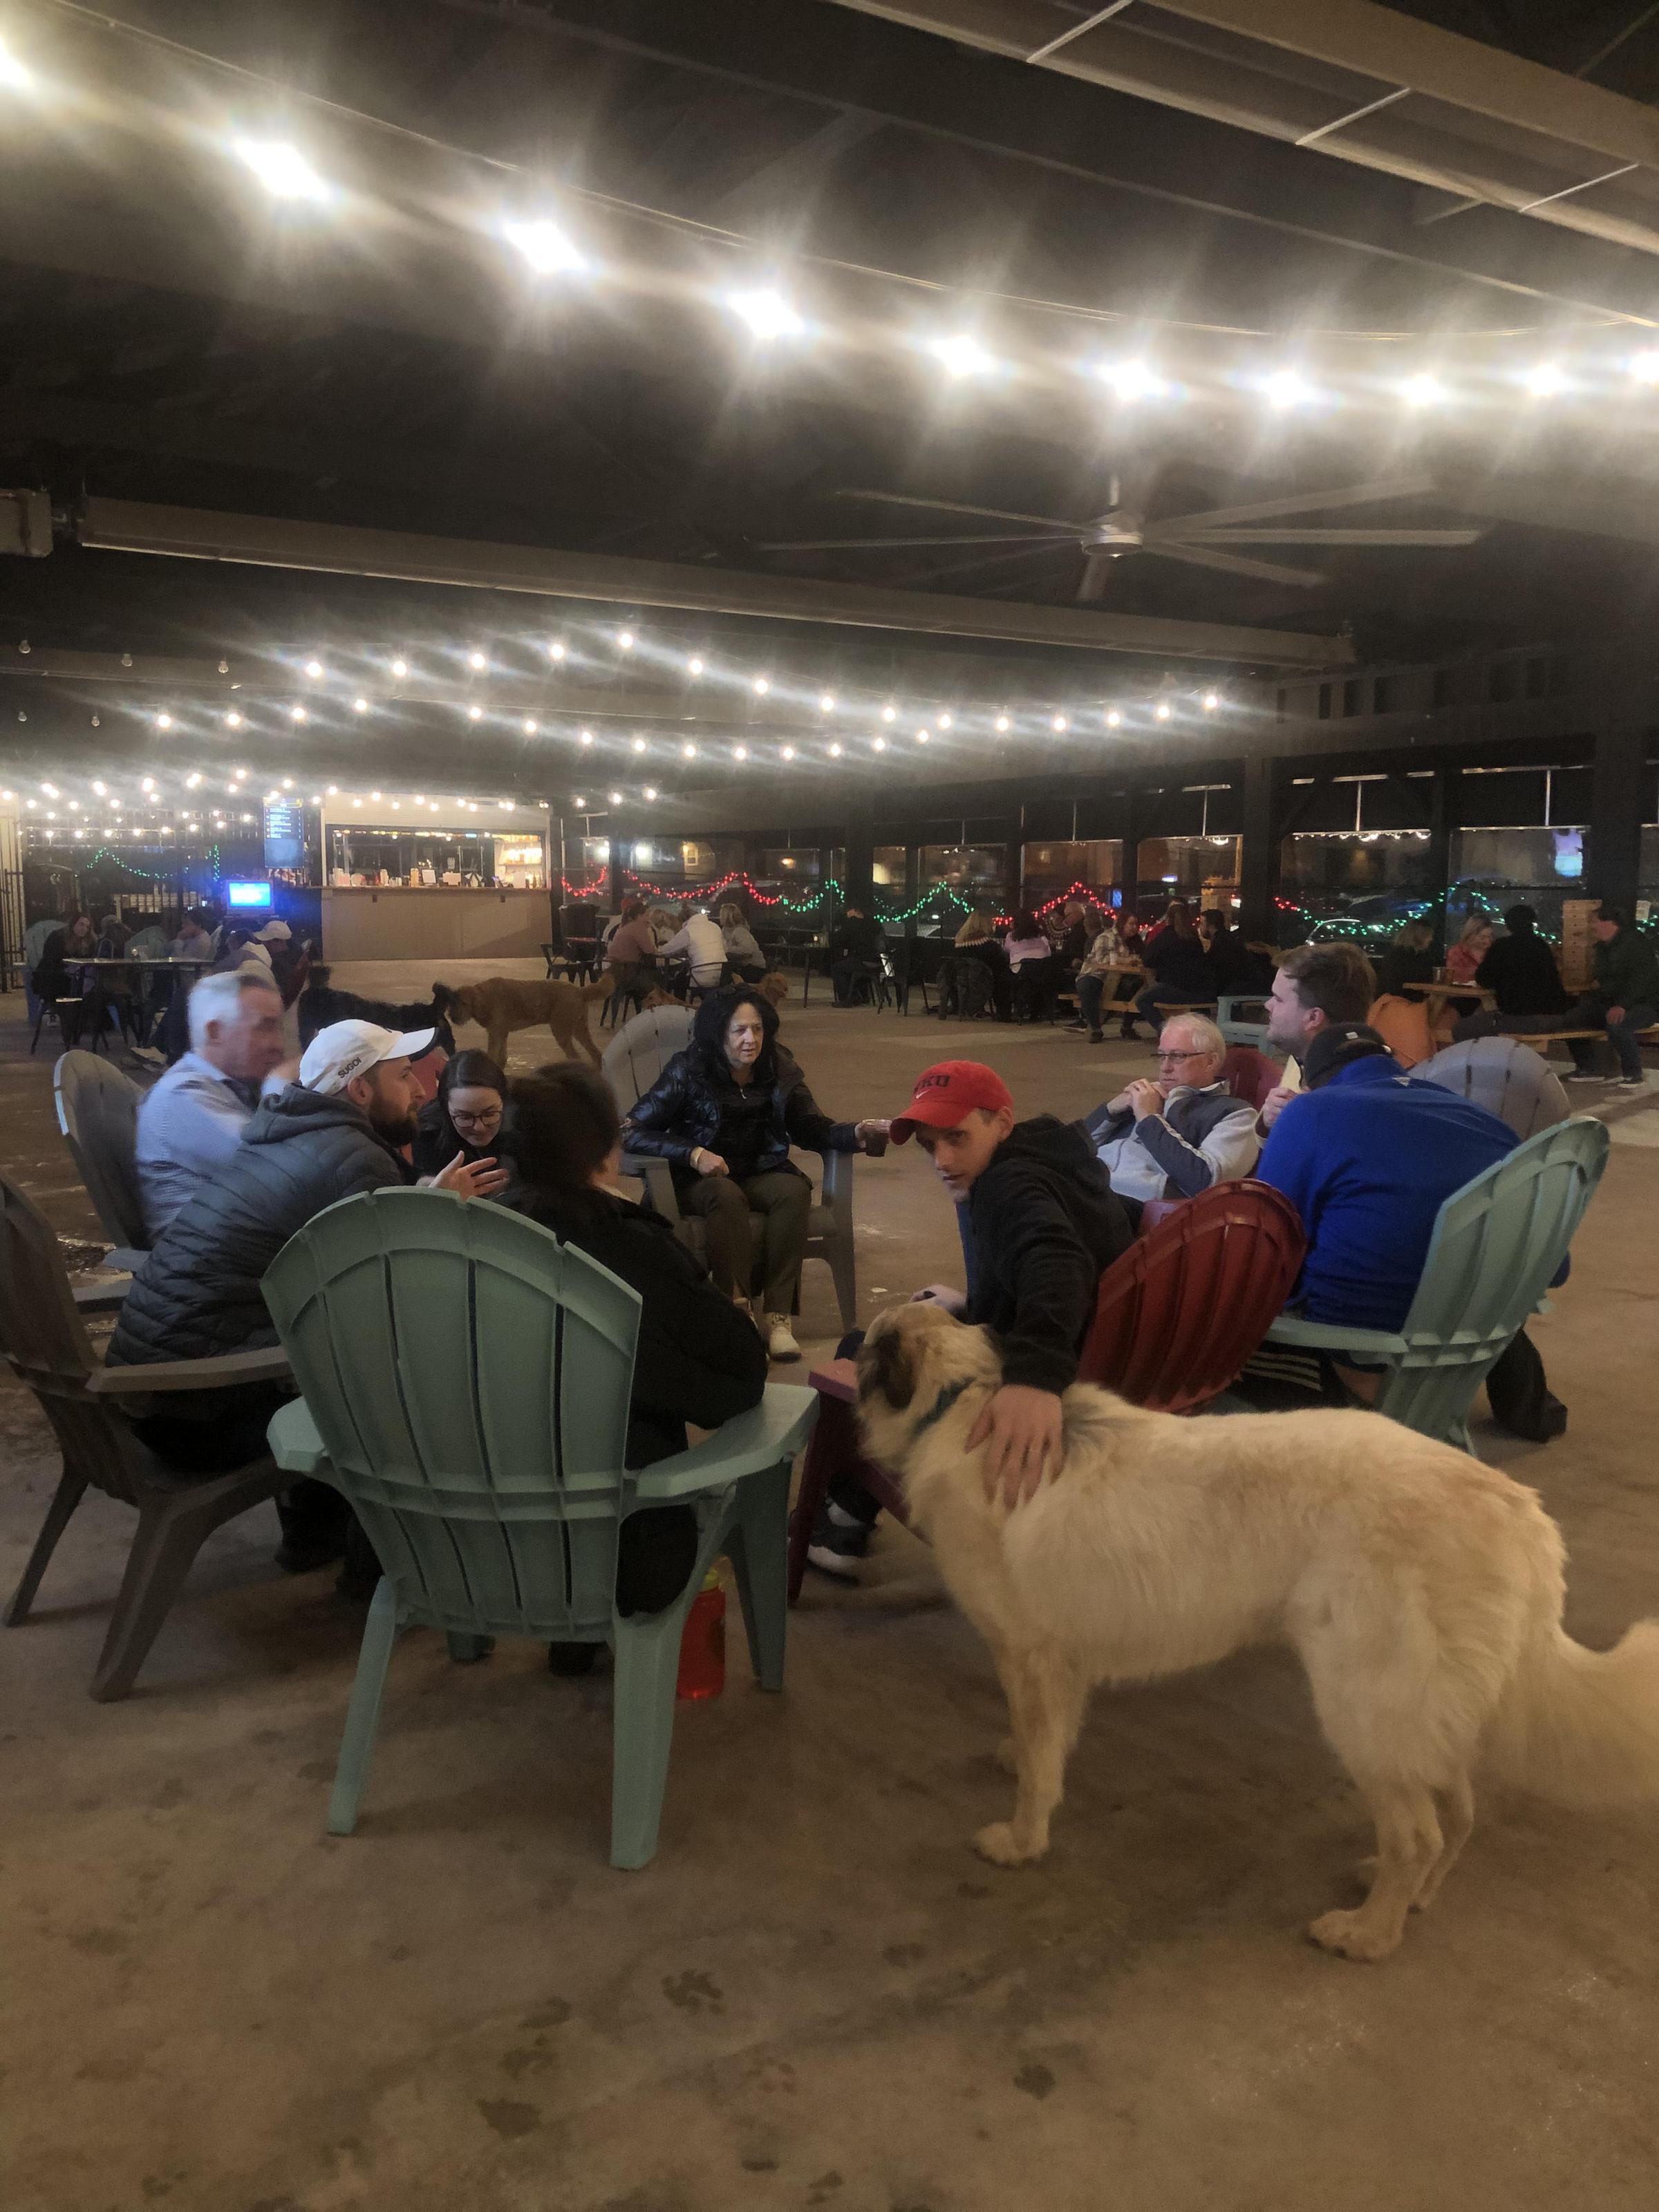 Club K9, a Louisville, KY Dog Bar where people and dogs mingle